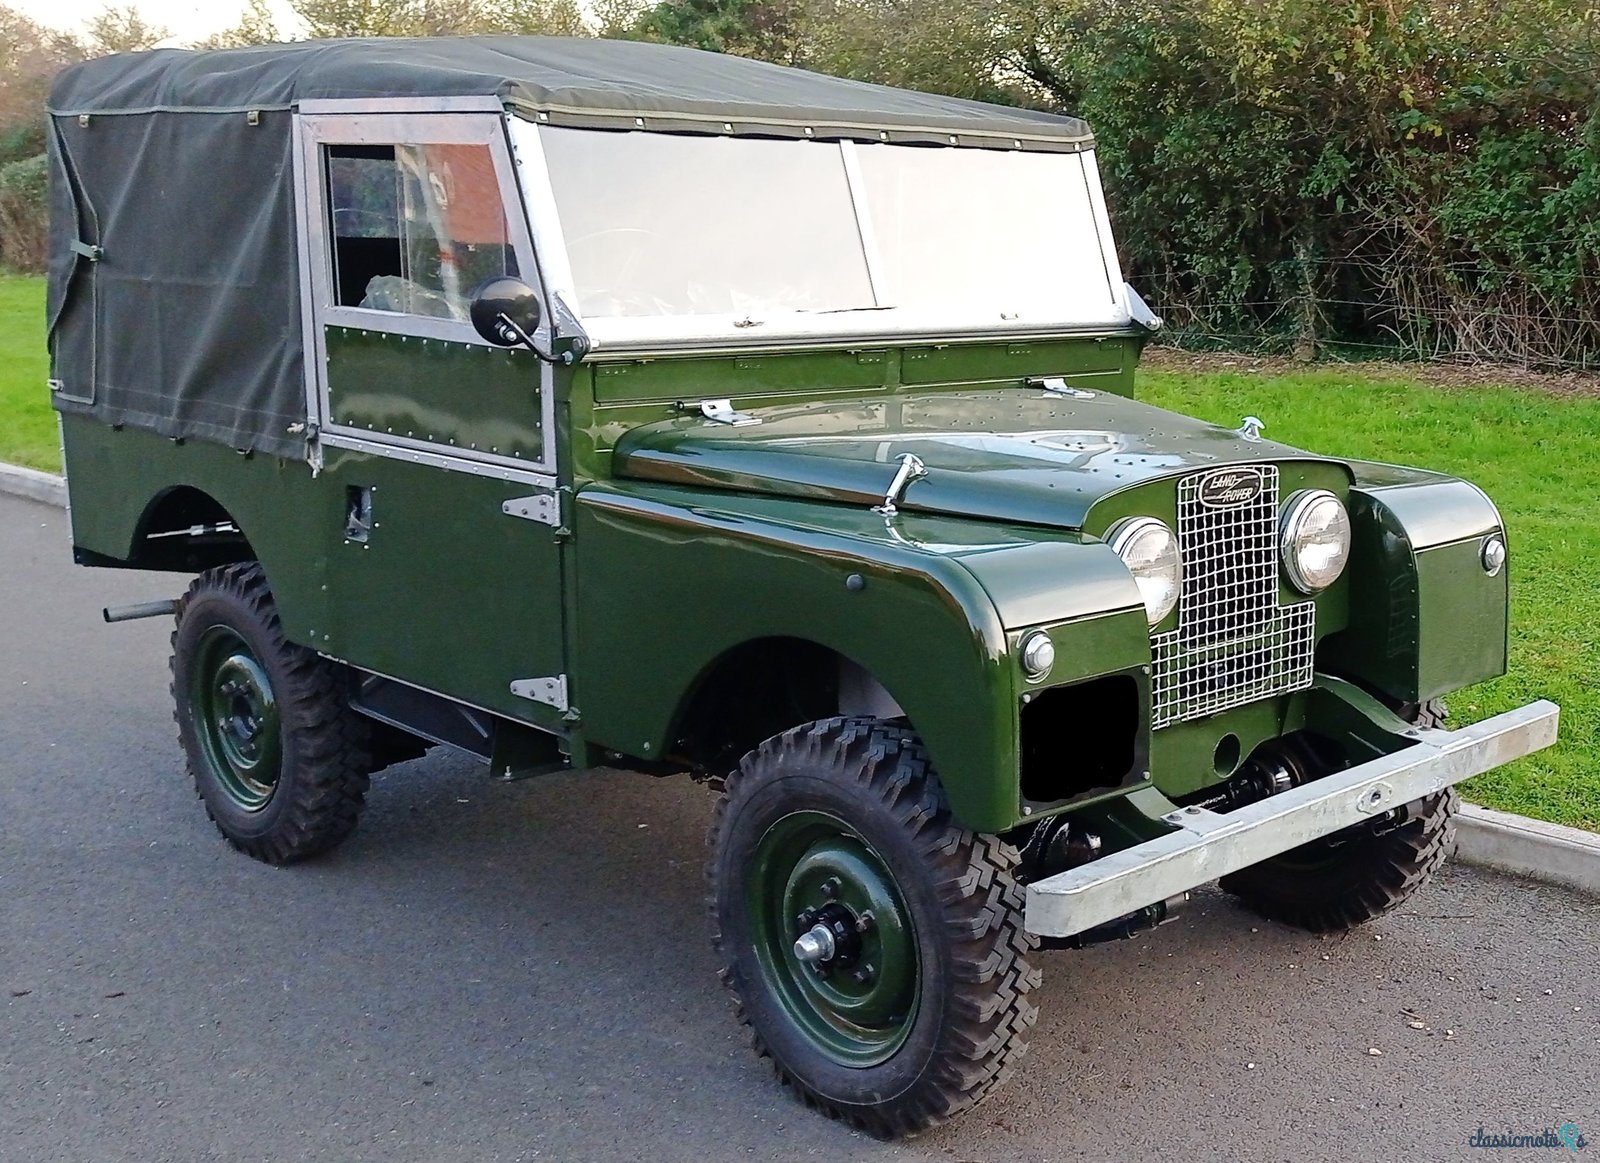 1954' Land Rover Series 1 for sale. Essex